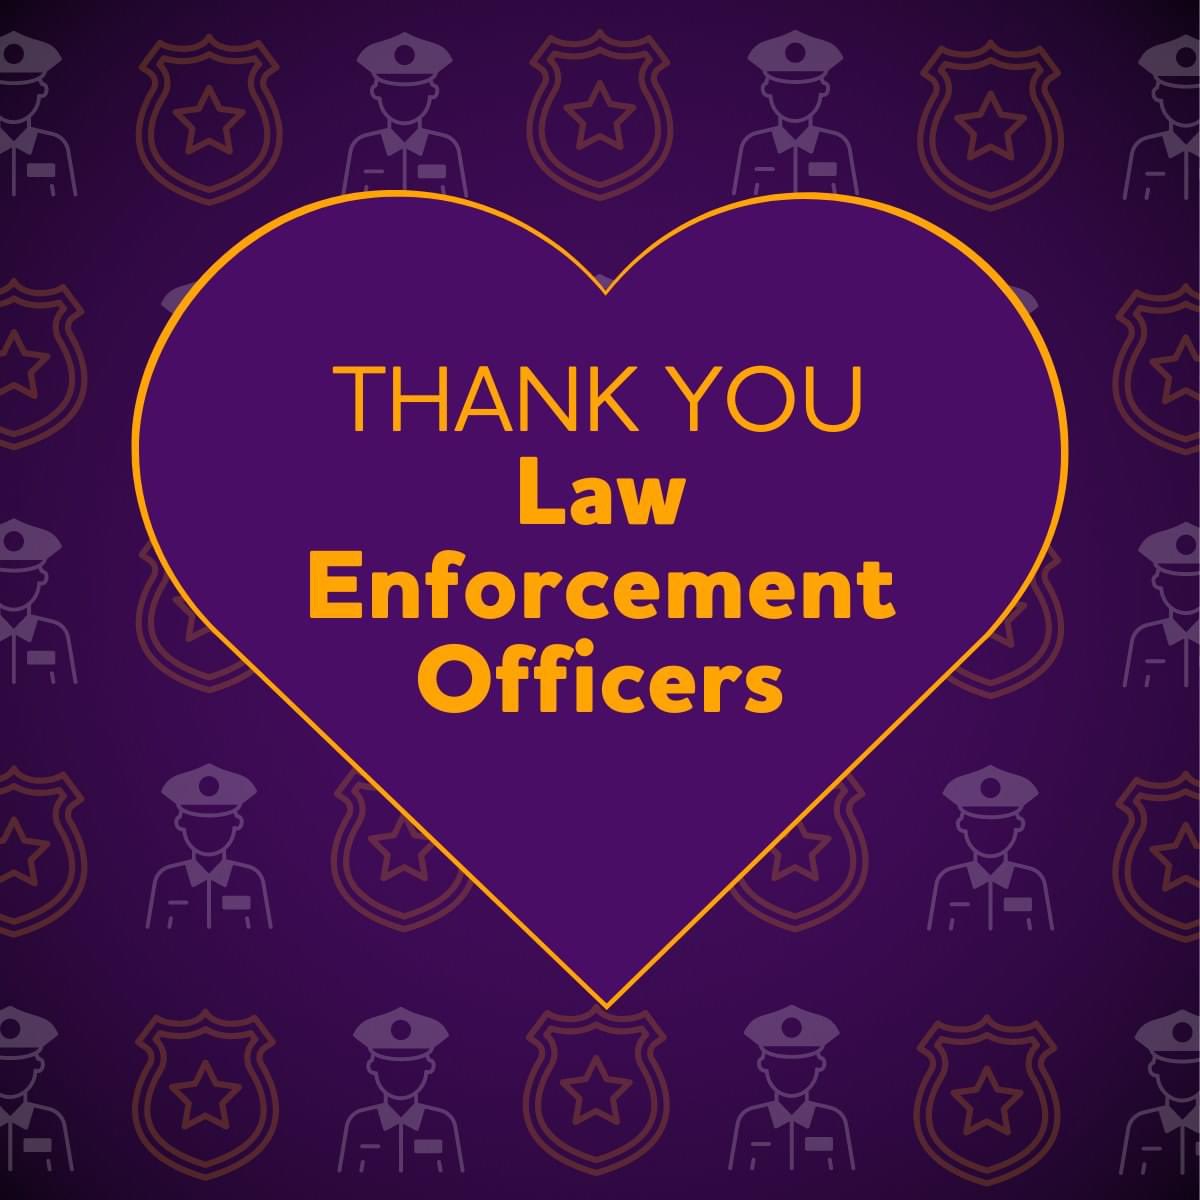 Happy National Law Enforcement Day! We are incredibly grateful for the brave individuals who serve our communities daily. Due to the nature of Alzheimer's disease, individuals living with dementia have a higher risk of engaging with law enforcement. We appreciate their support!